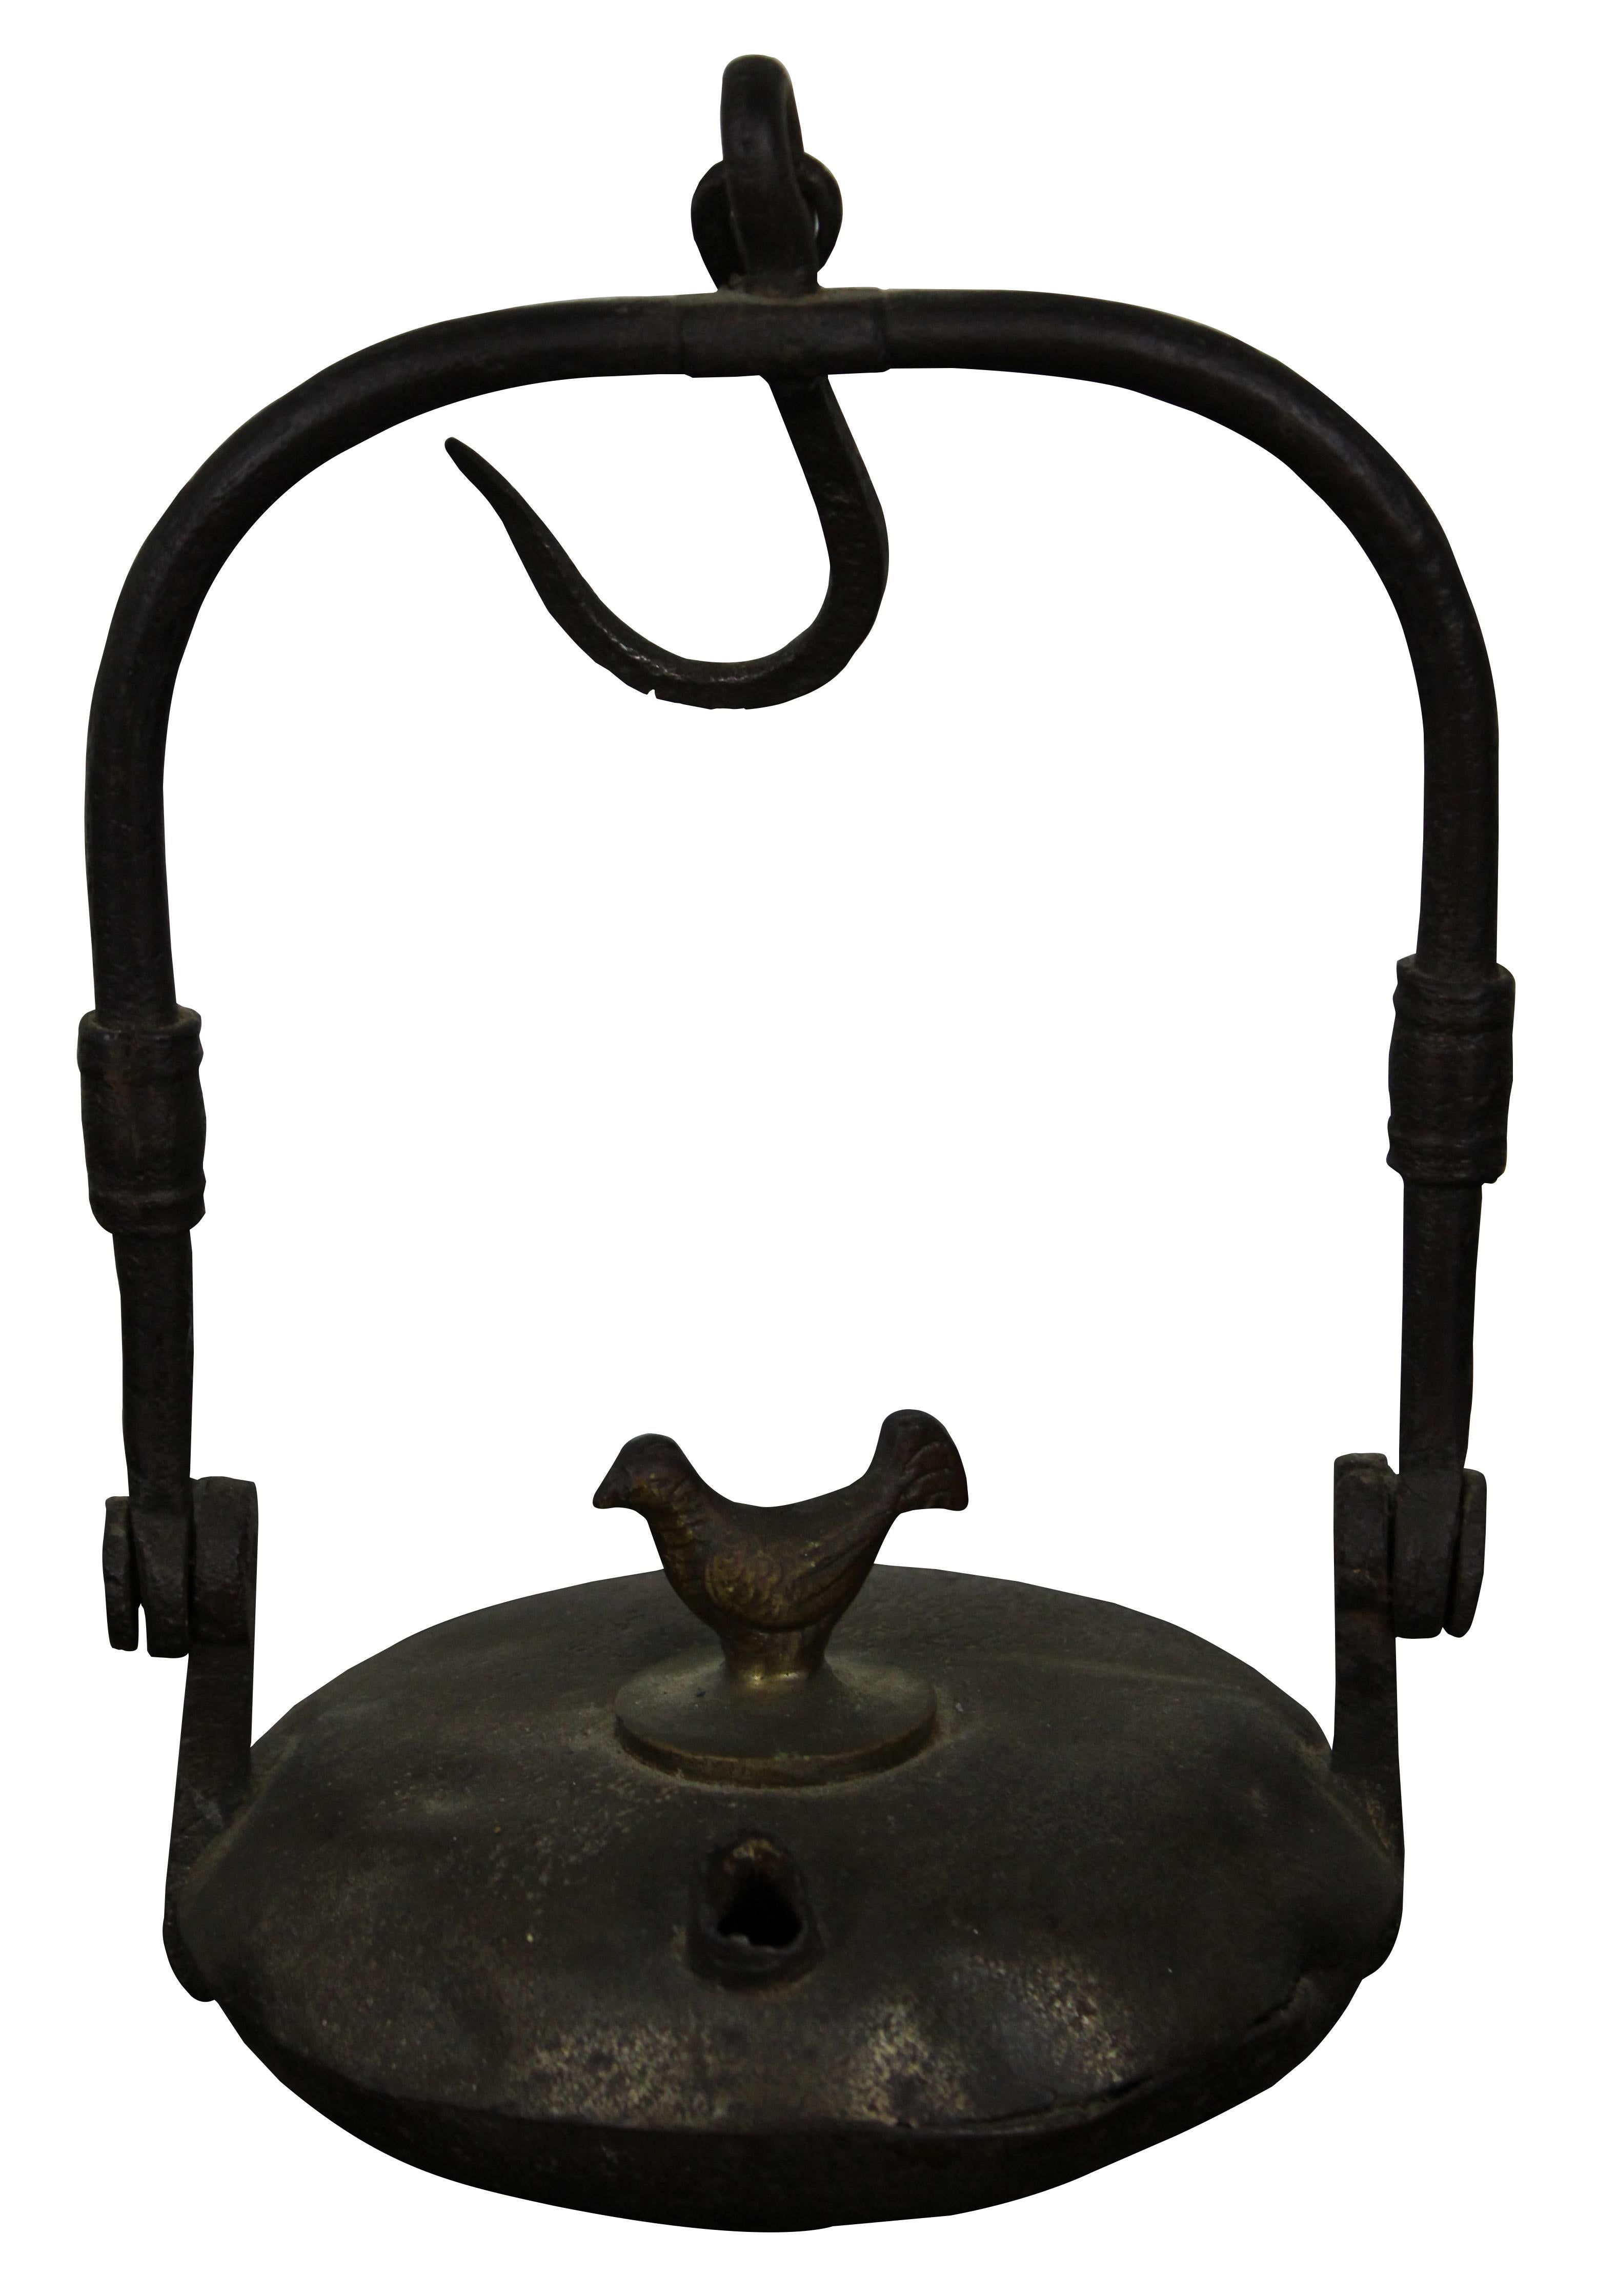 Antique early 18th century French miner’s whale oil lantern, decorated with a brass rooster and iron handle/hook.